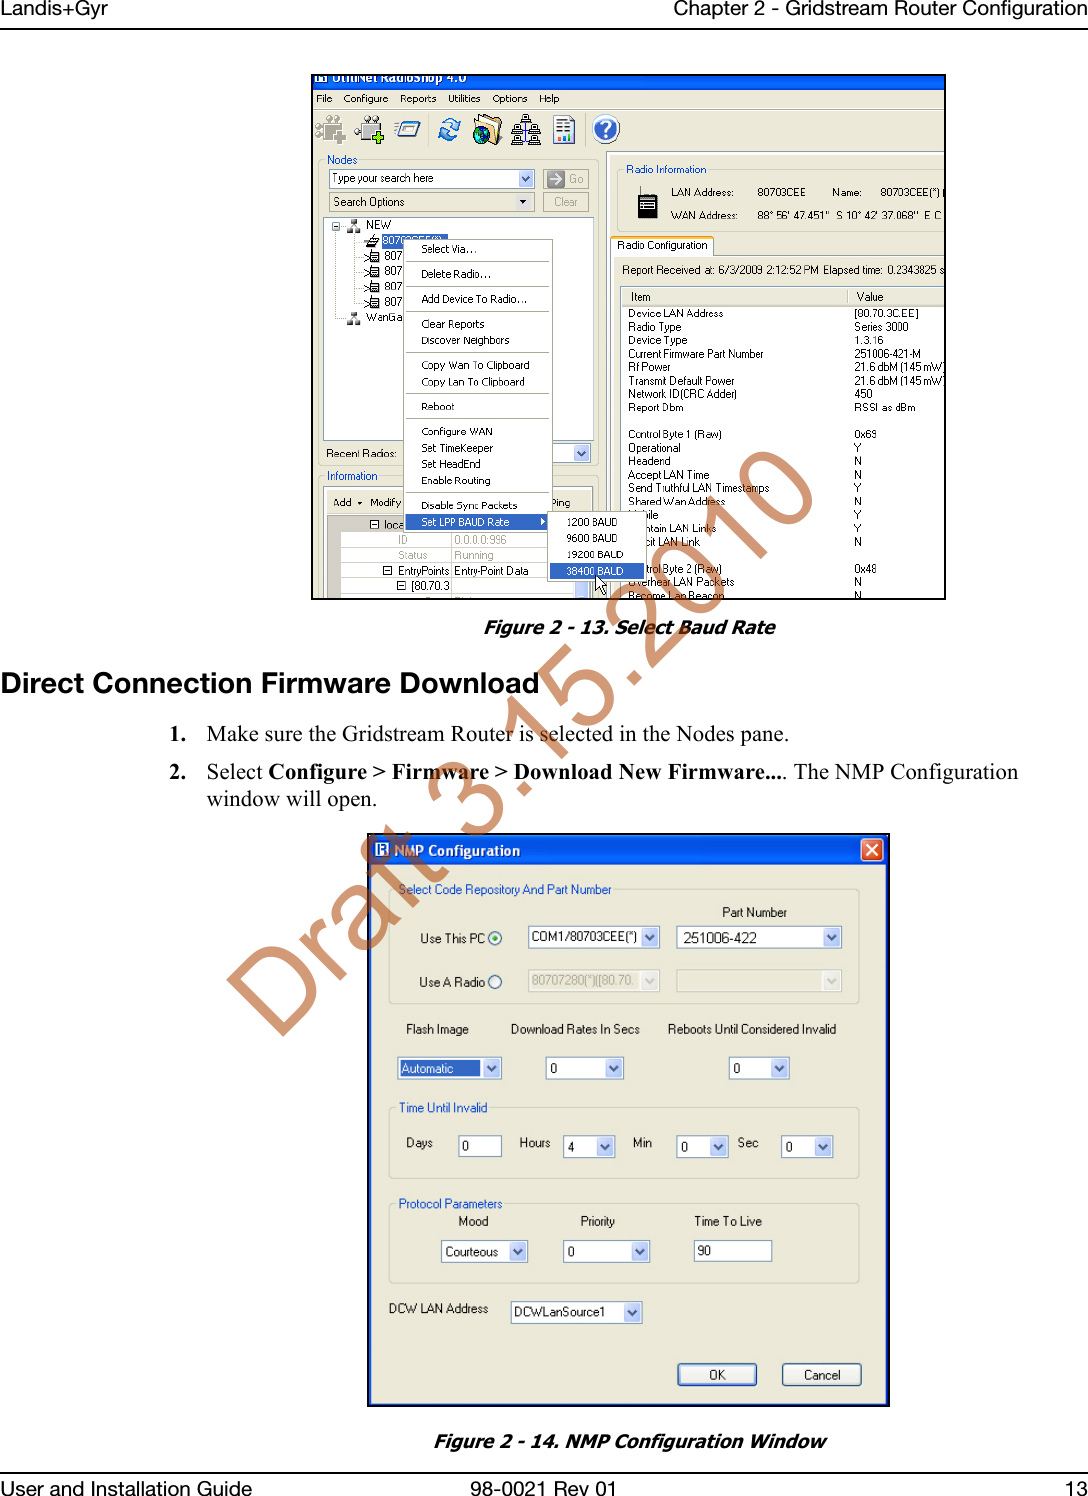 Landis+Gyr Chapter 2 - Gridstream Router ConfigurationUser and Installation Guide 98-0021 Rev 01 13Figure 2 - 13. Select Baud RateDirect Connection Firmware Download1. Make sure the Gridstream Router is selected in the Nodes pane.2. Select Configure &gt; Firmware &gt; Download New Firmware.... The NMP Configuration window will open.Figure 2 - 14. NMP Configuration WindowDraft 3.15.2010